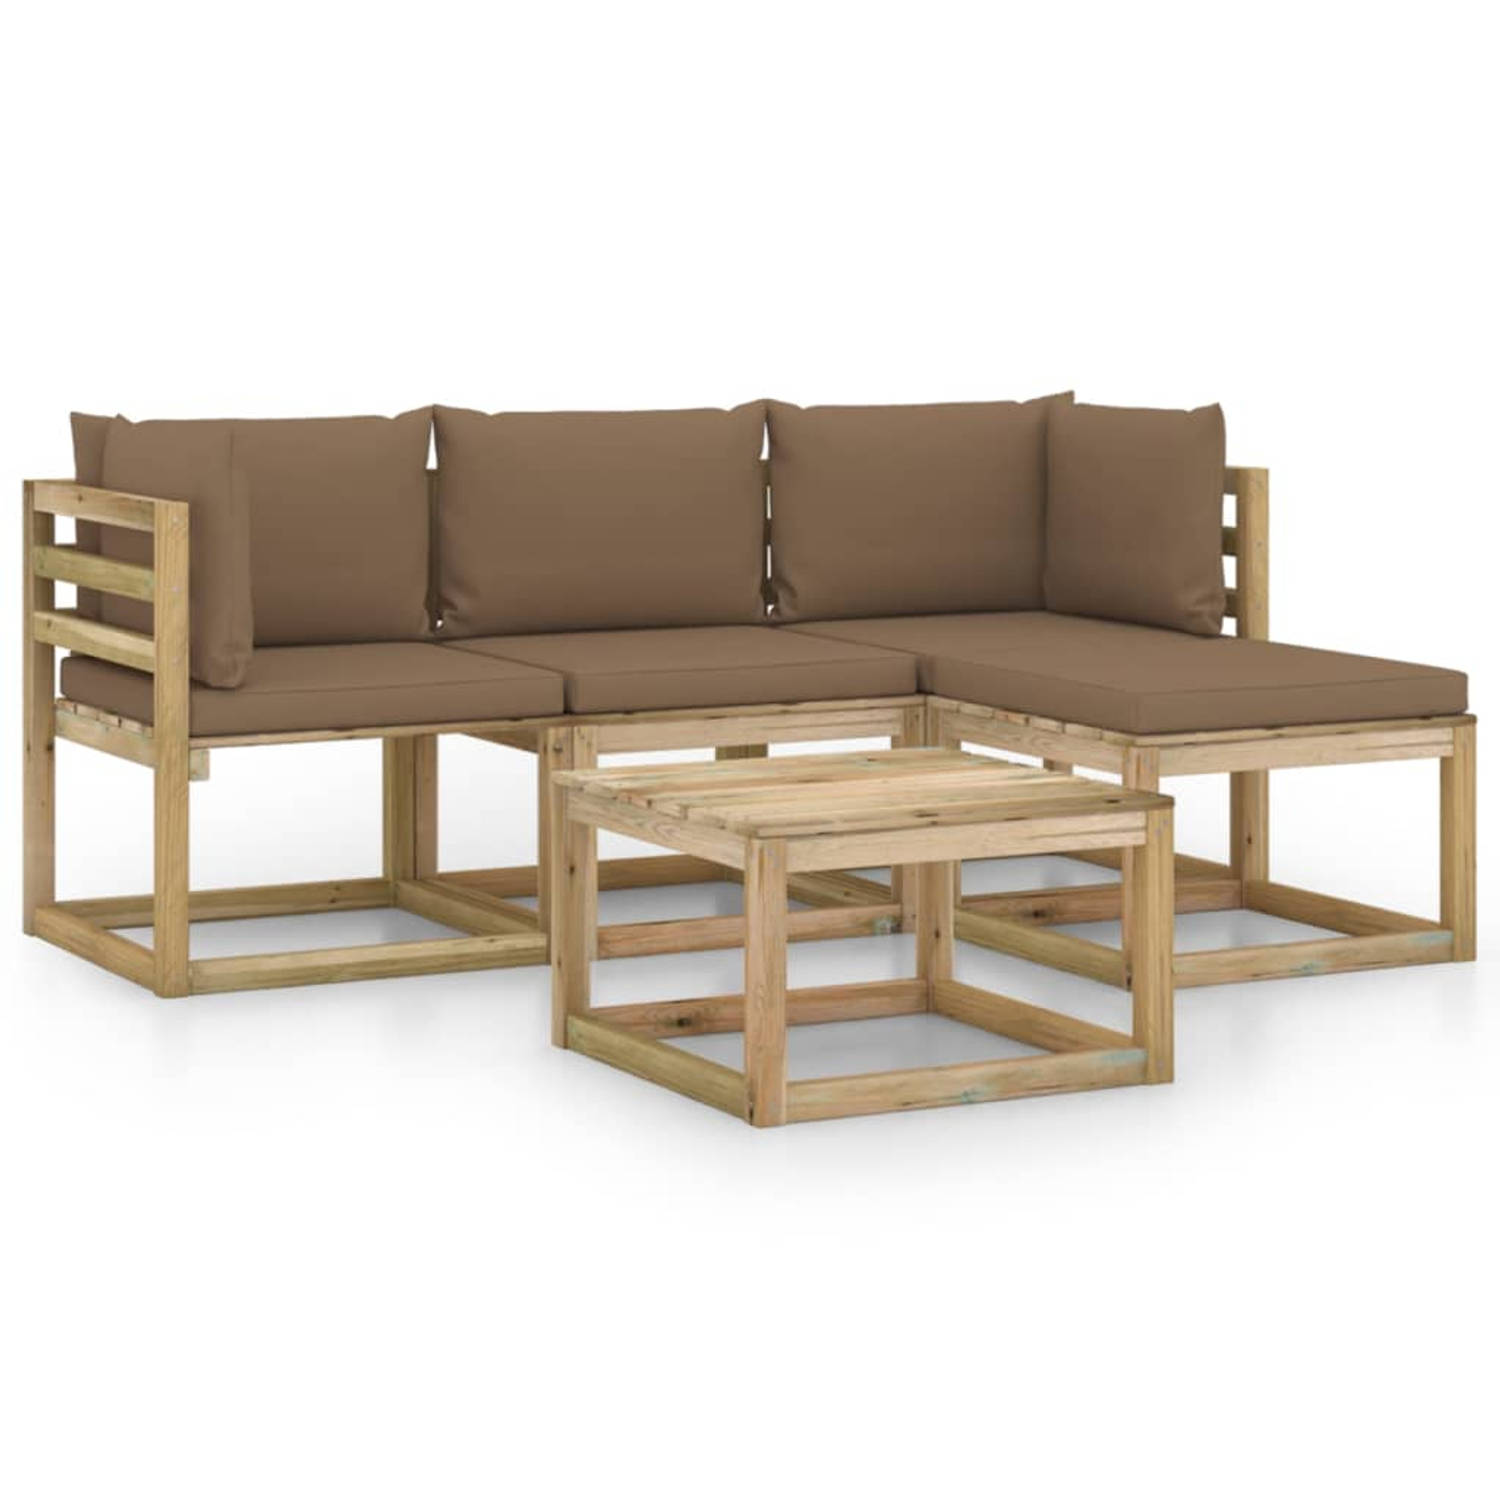 The Living Store 5-delige Loungeset met taupe kussens - Tuinset